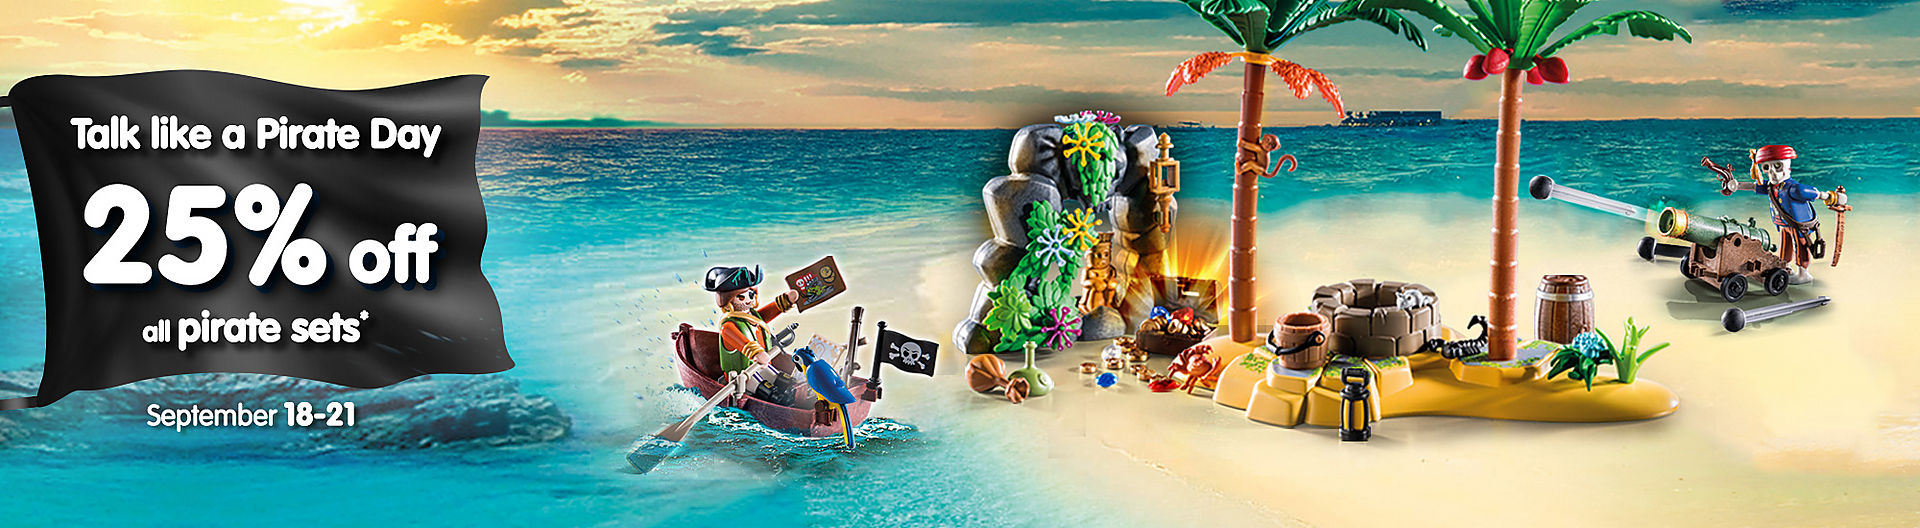 Talk Like a Pirate Day - Get 25% off specified Pirate sets like 70962 Pirate Treasure Island with Rowboat